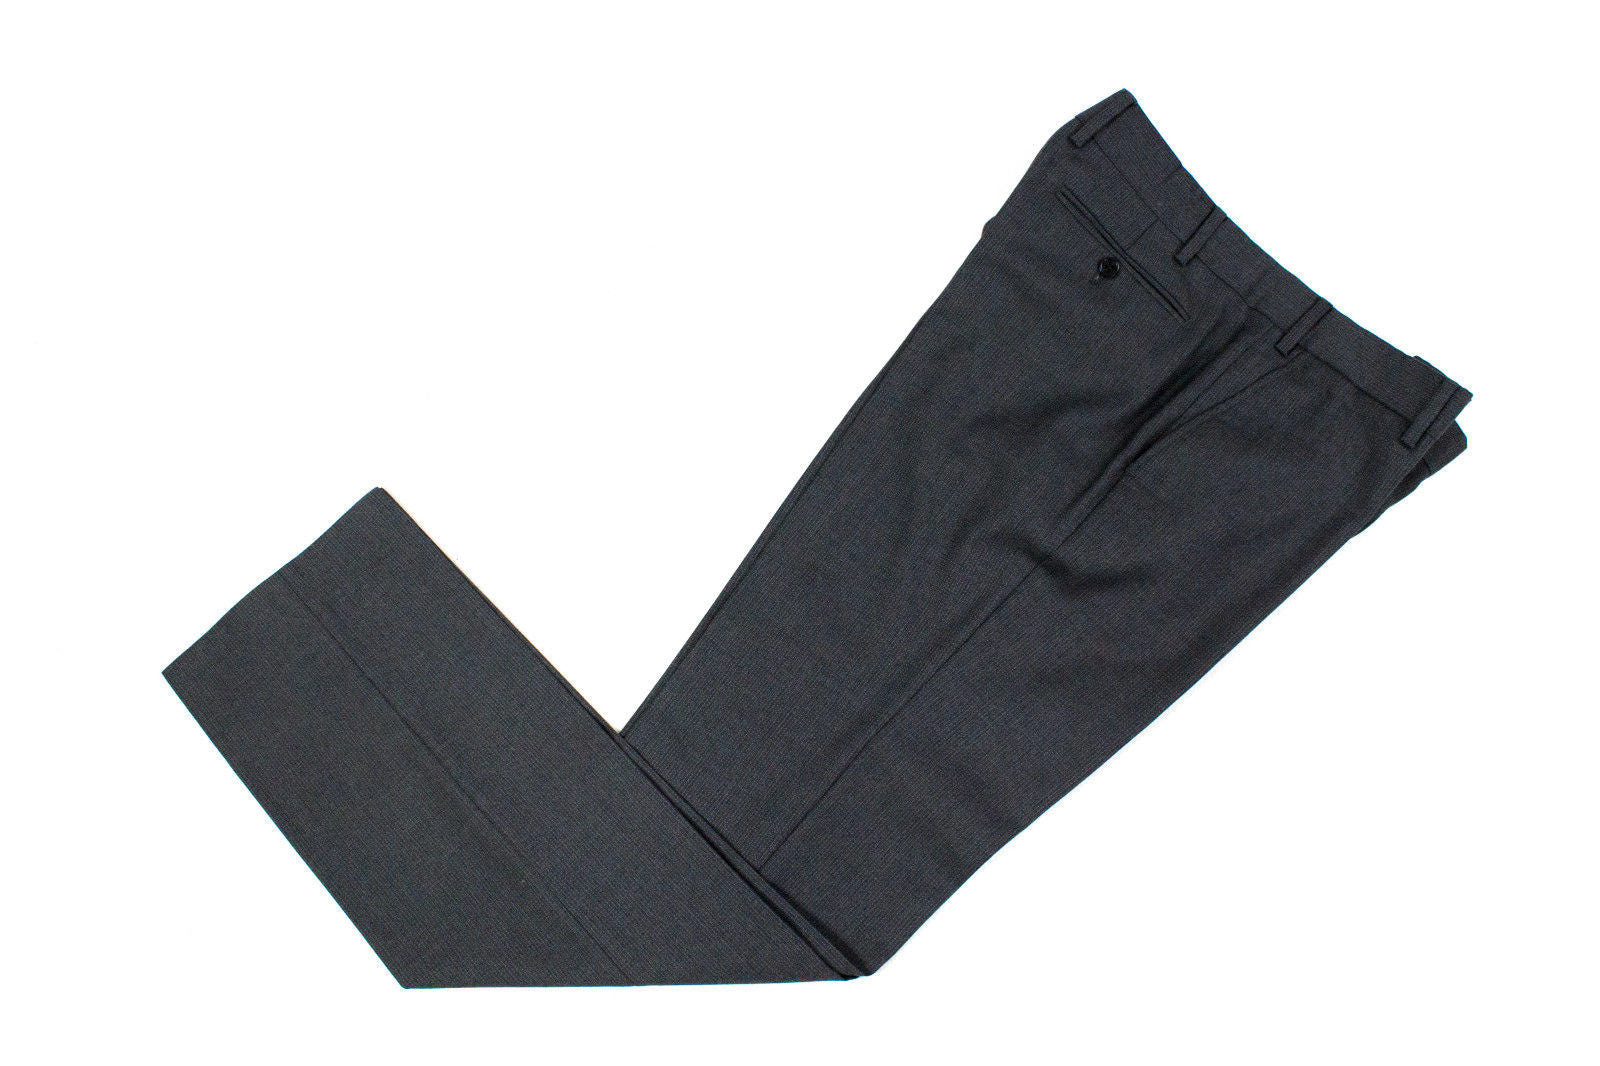 PAUL SMITH GRAY WOOL Straight Leg Slim Fit Pants, Size 34 - secondfirst